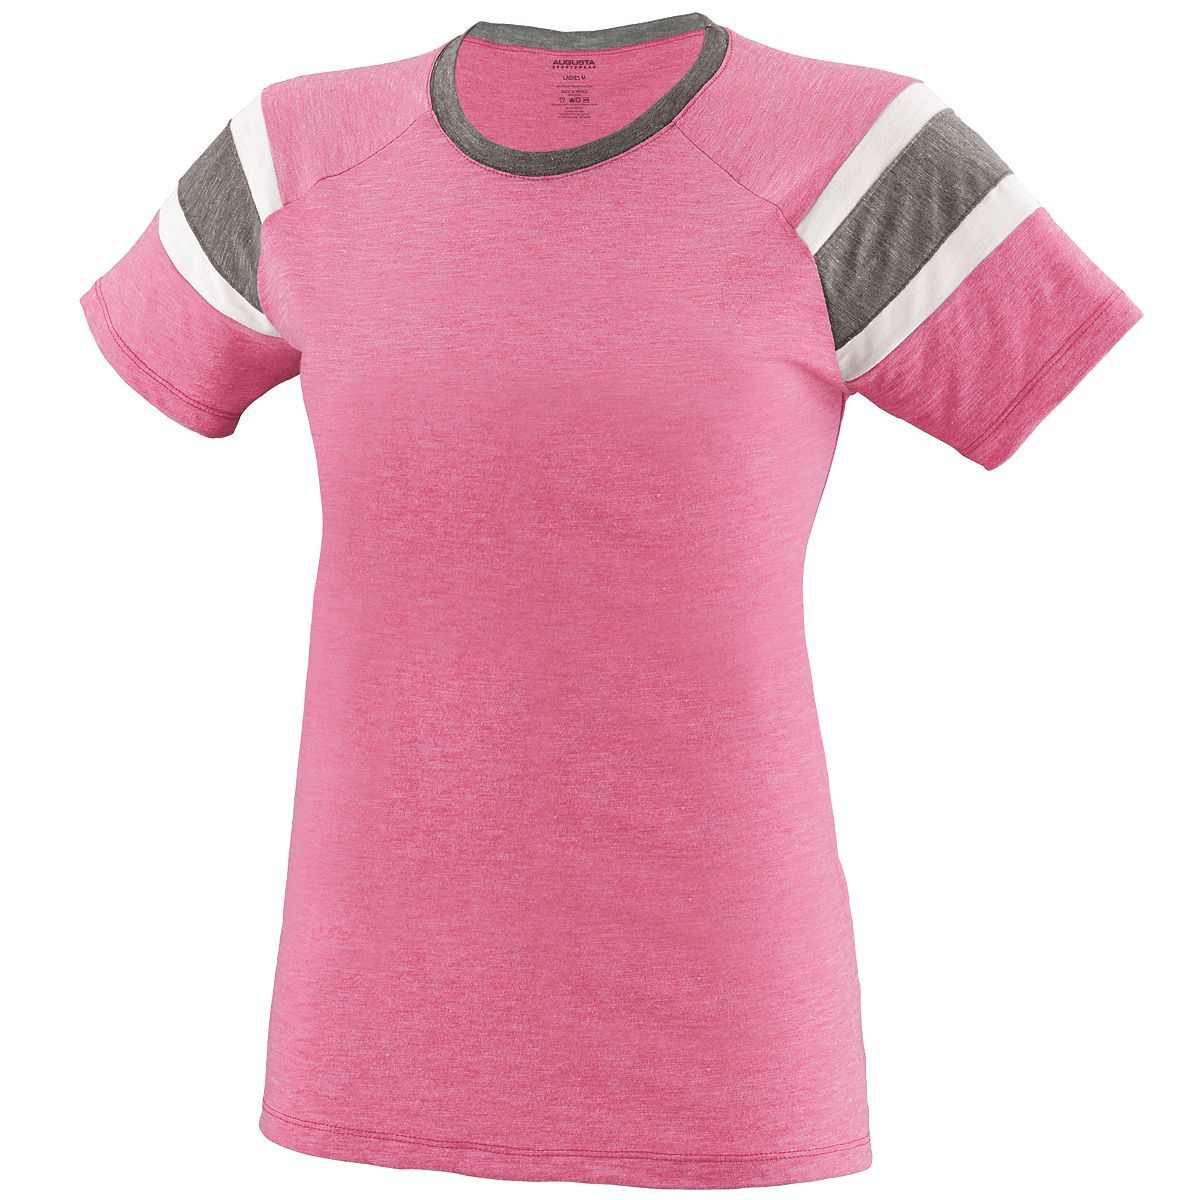 Augusta Sportswear Girls Fanatic Tee in Power Pink/Slate/White  -Part of the Girls, T-Shirts, Augusta-Products, Girls-Tee-Shirt, Shirts product lines at KanaleyCreations.com